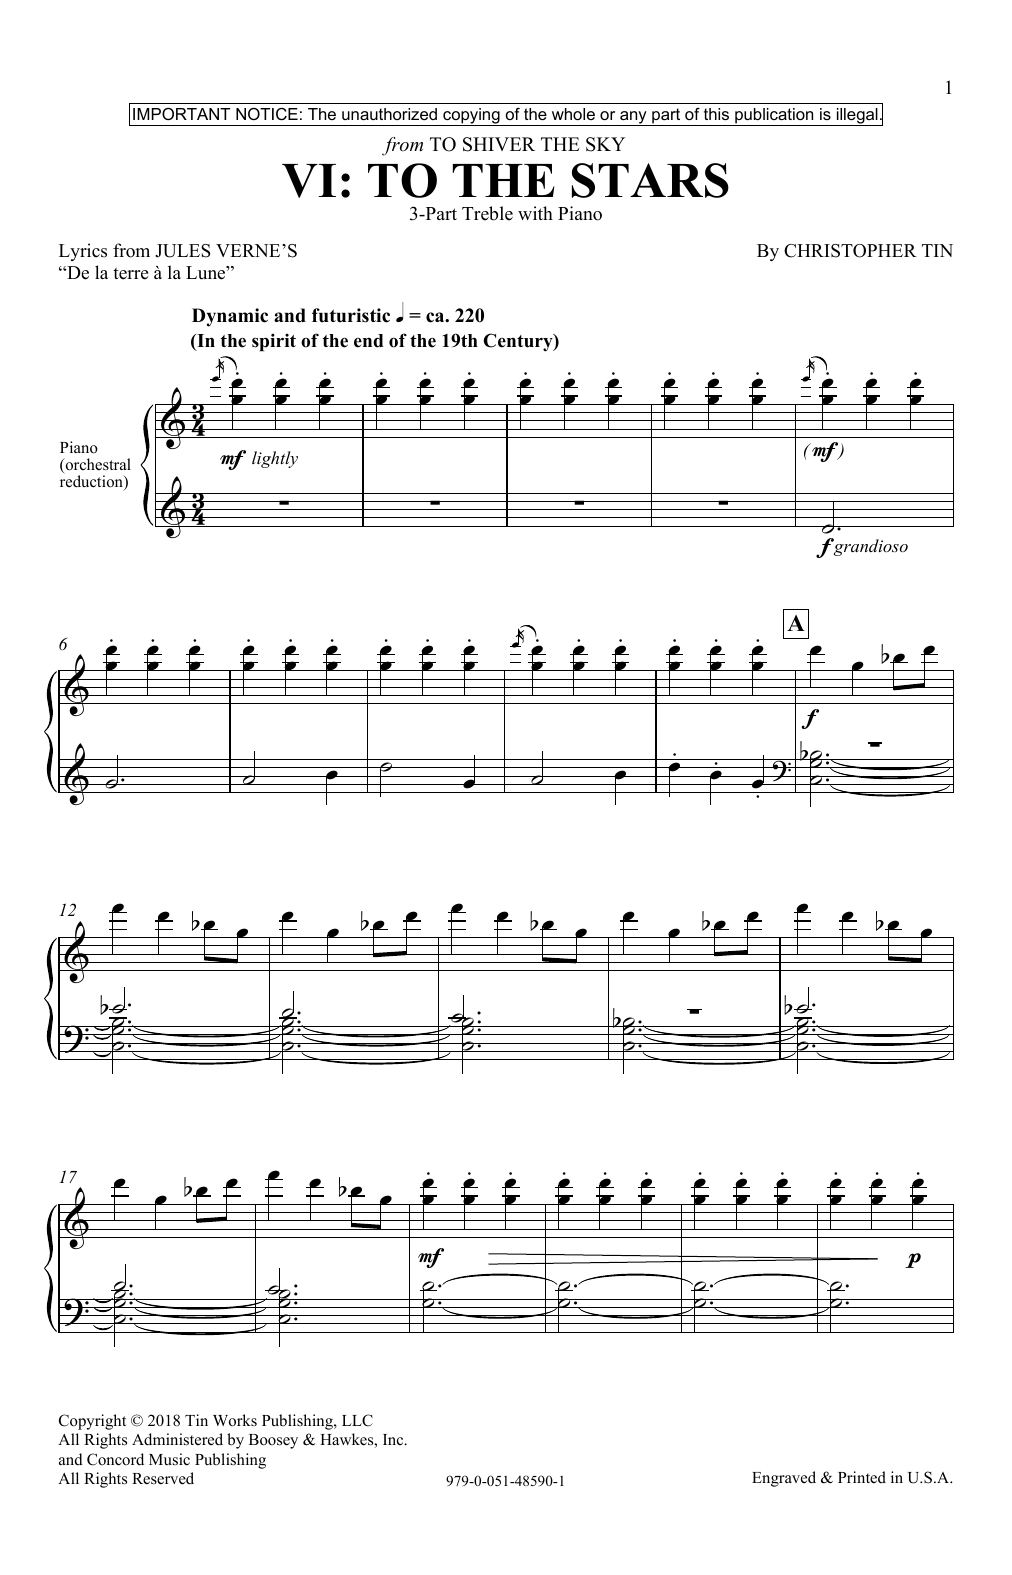 Download Christopher Tin To The Stars (from To Shiver The Sky) Sheet Music